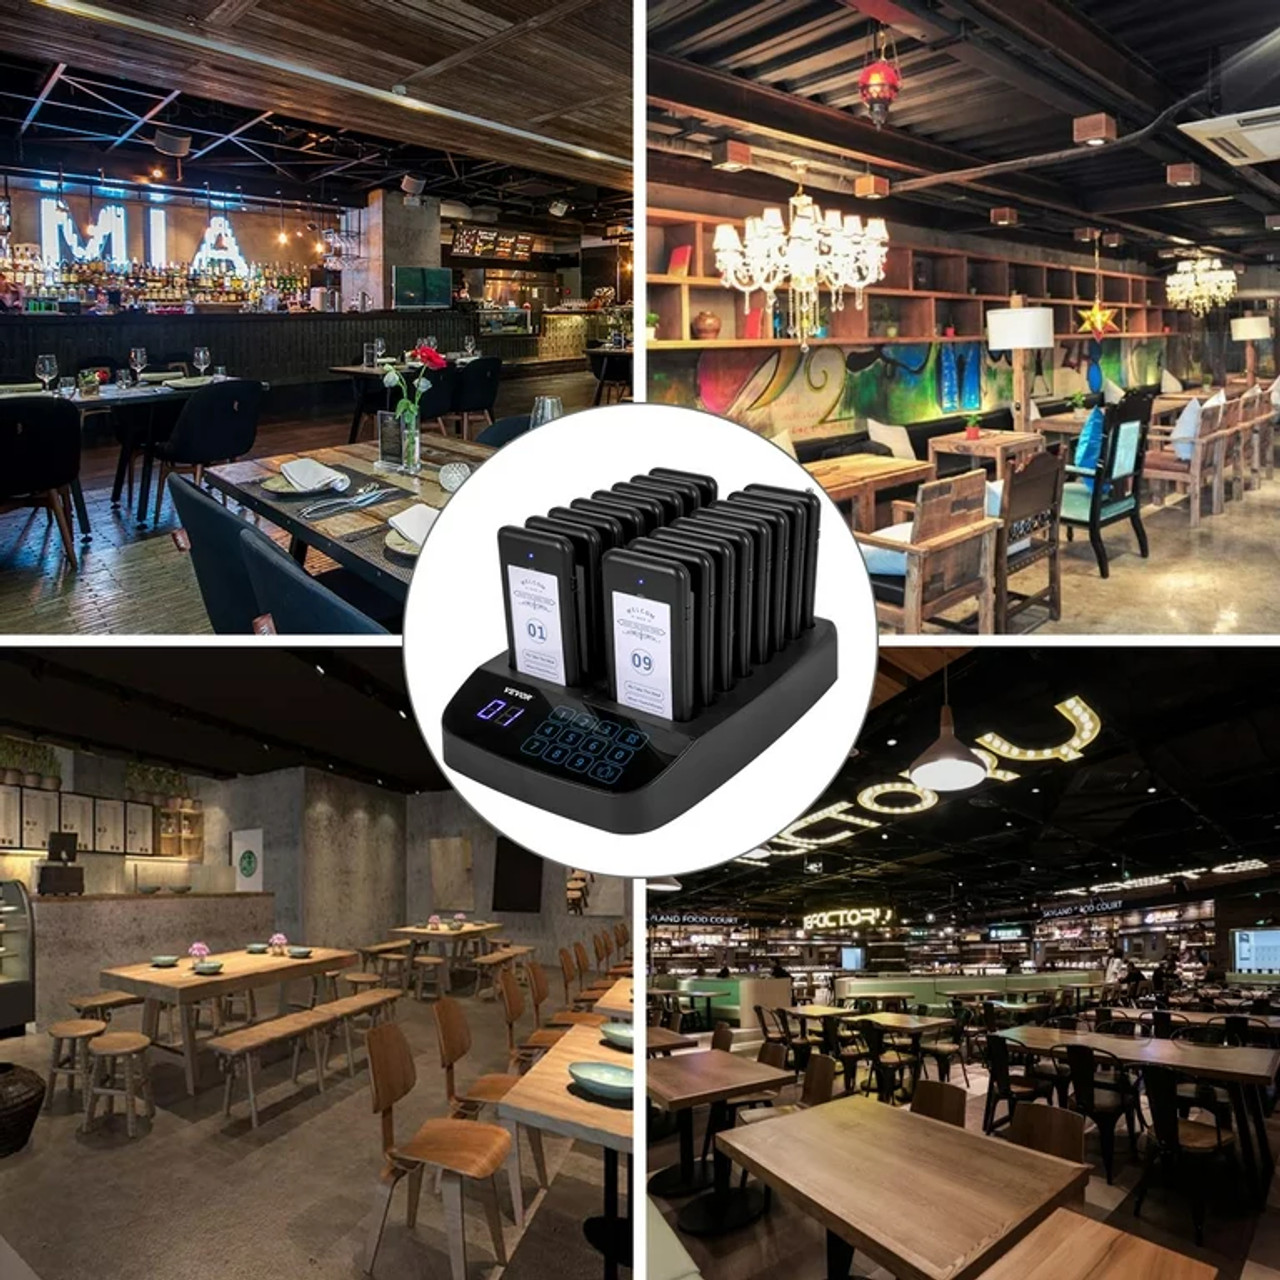 F101 Restaurant Pager System 16 Pagers, Max 98 Beepers Wireless Calling System, Touch Keyboard with Vibration, Flashing and Buzzer for Church,